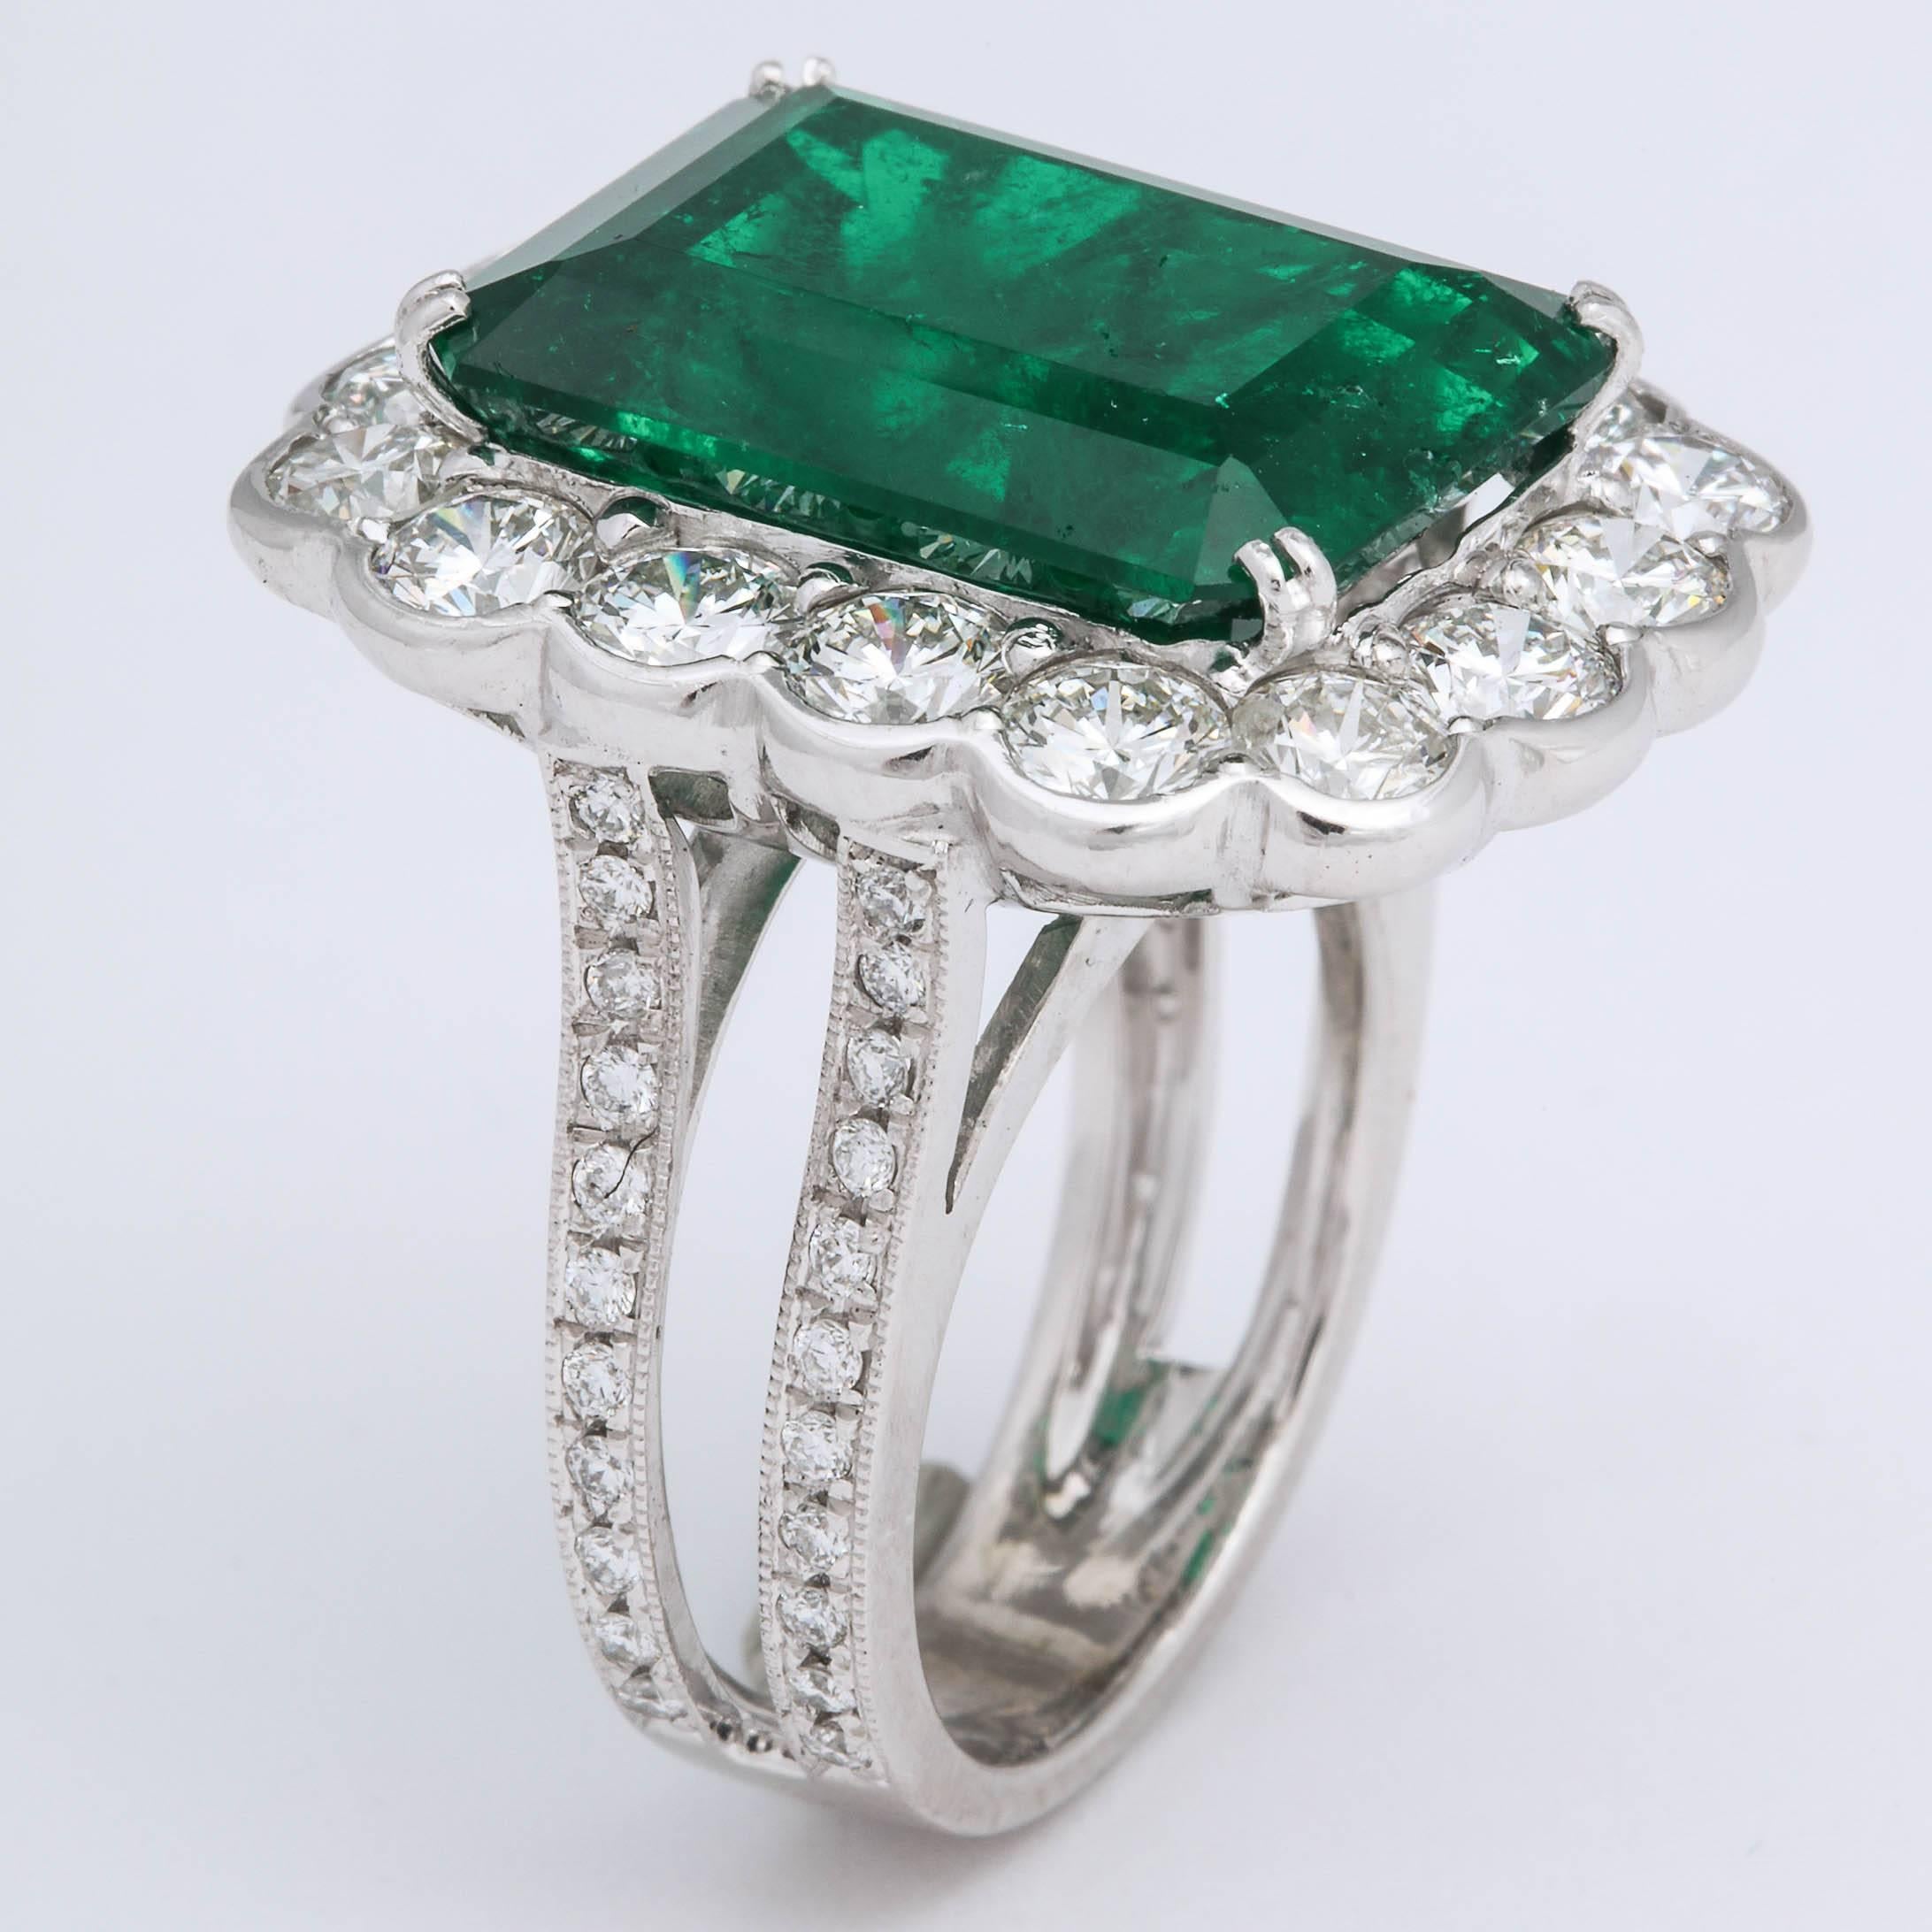 Emerald Cut Important 13 Carat Colombian Emerald and Diamond Ring GIA Certified For Sale